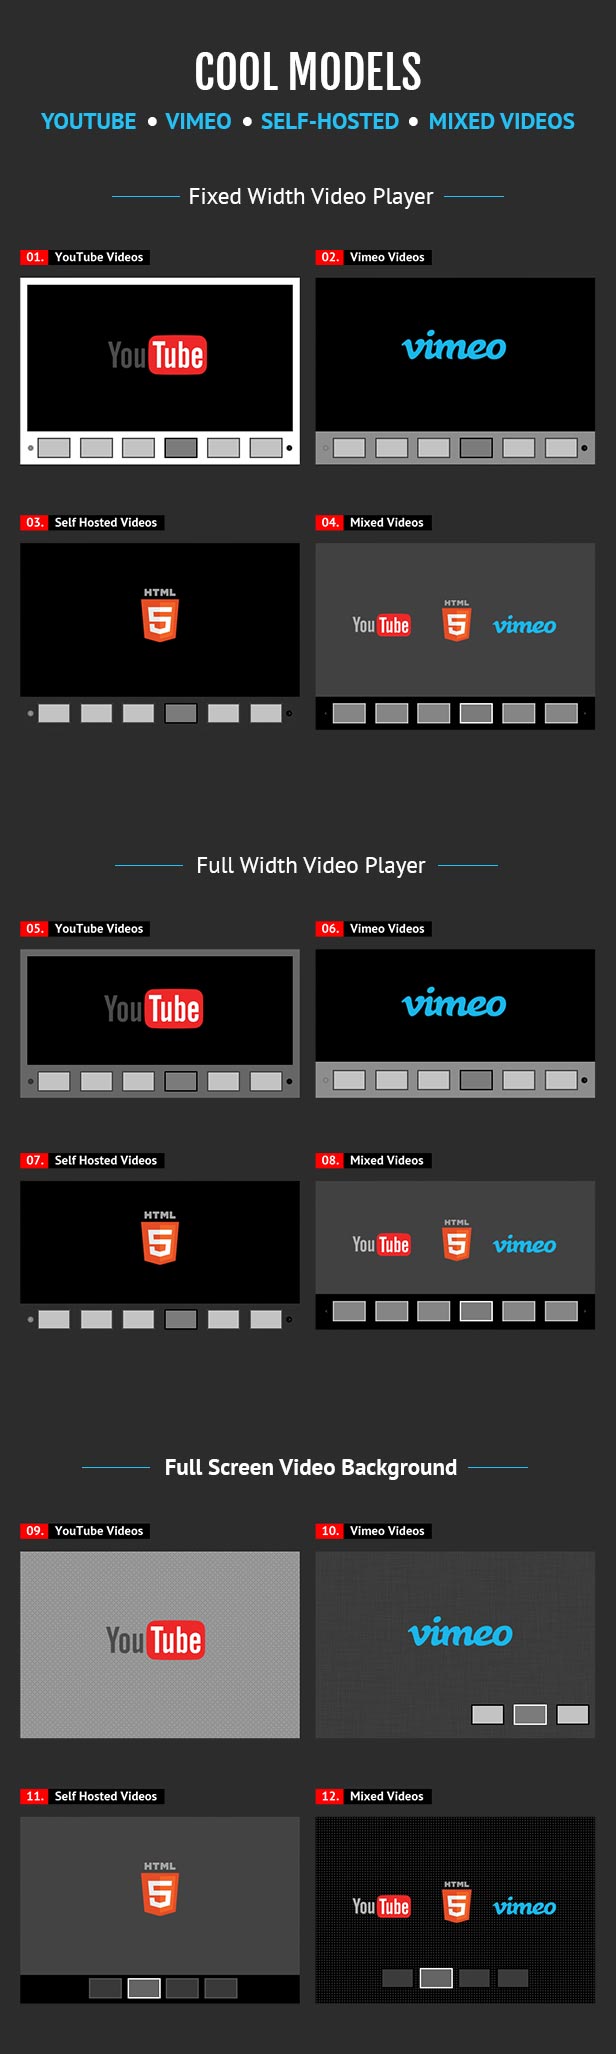 Video Player and FullScreen Video Background Wp Plugin